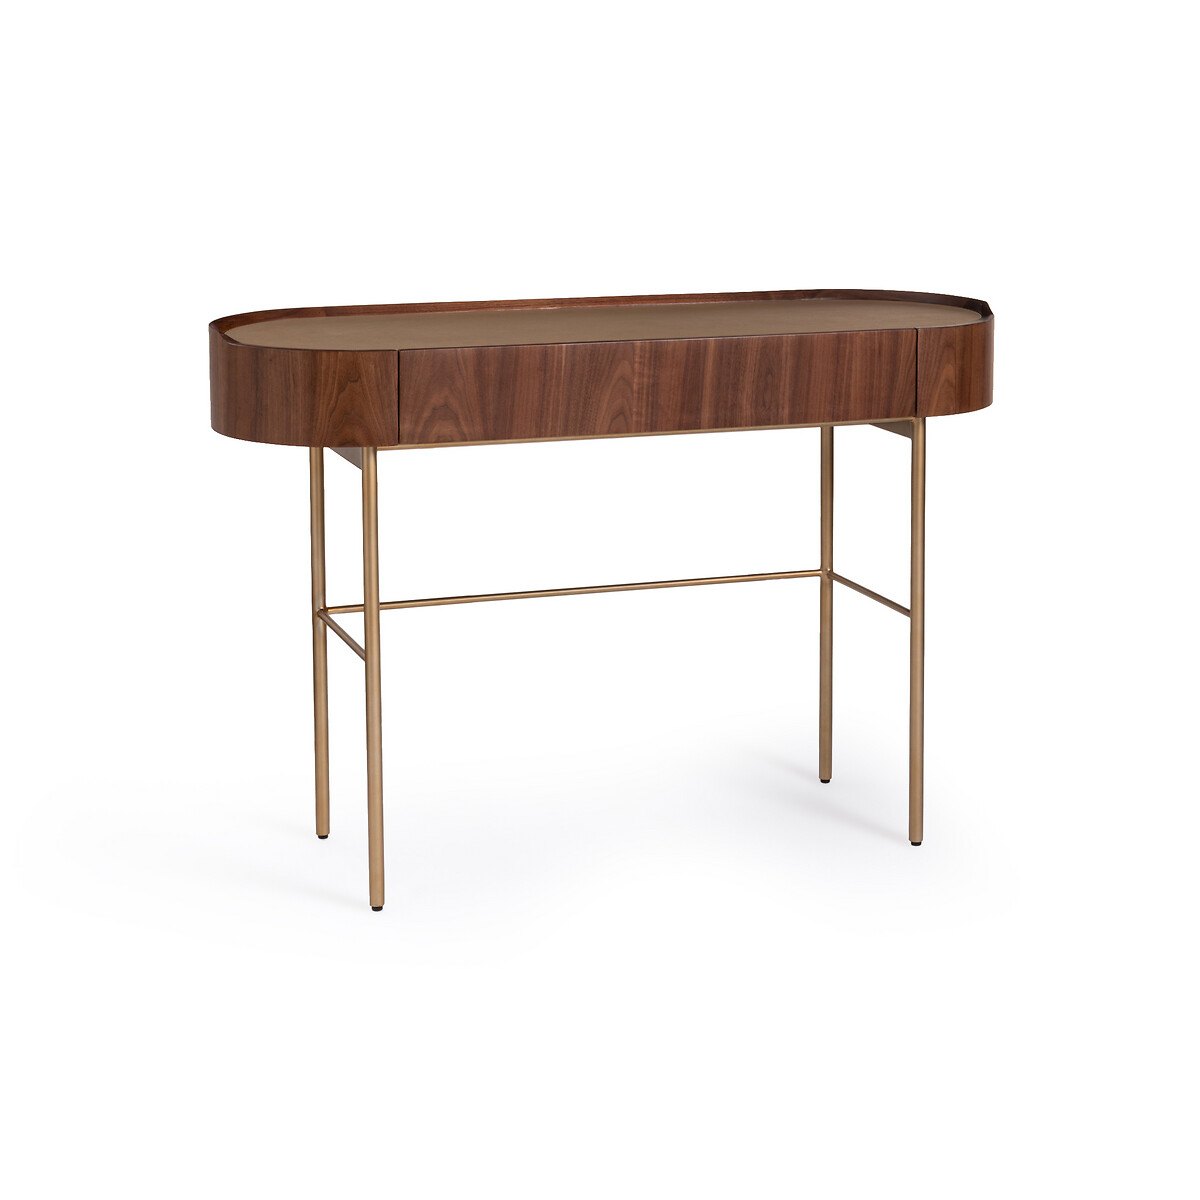 Aslen Walnut and Leather Console Table / Desk